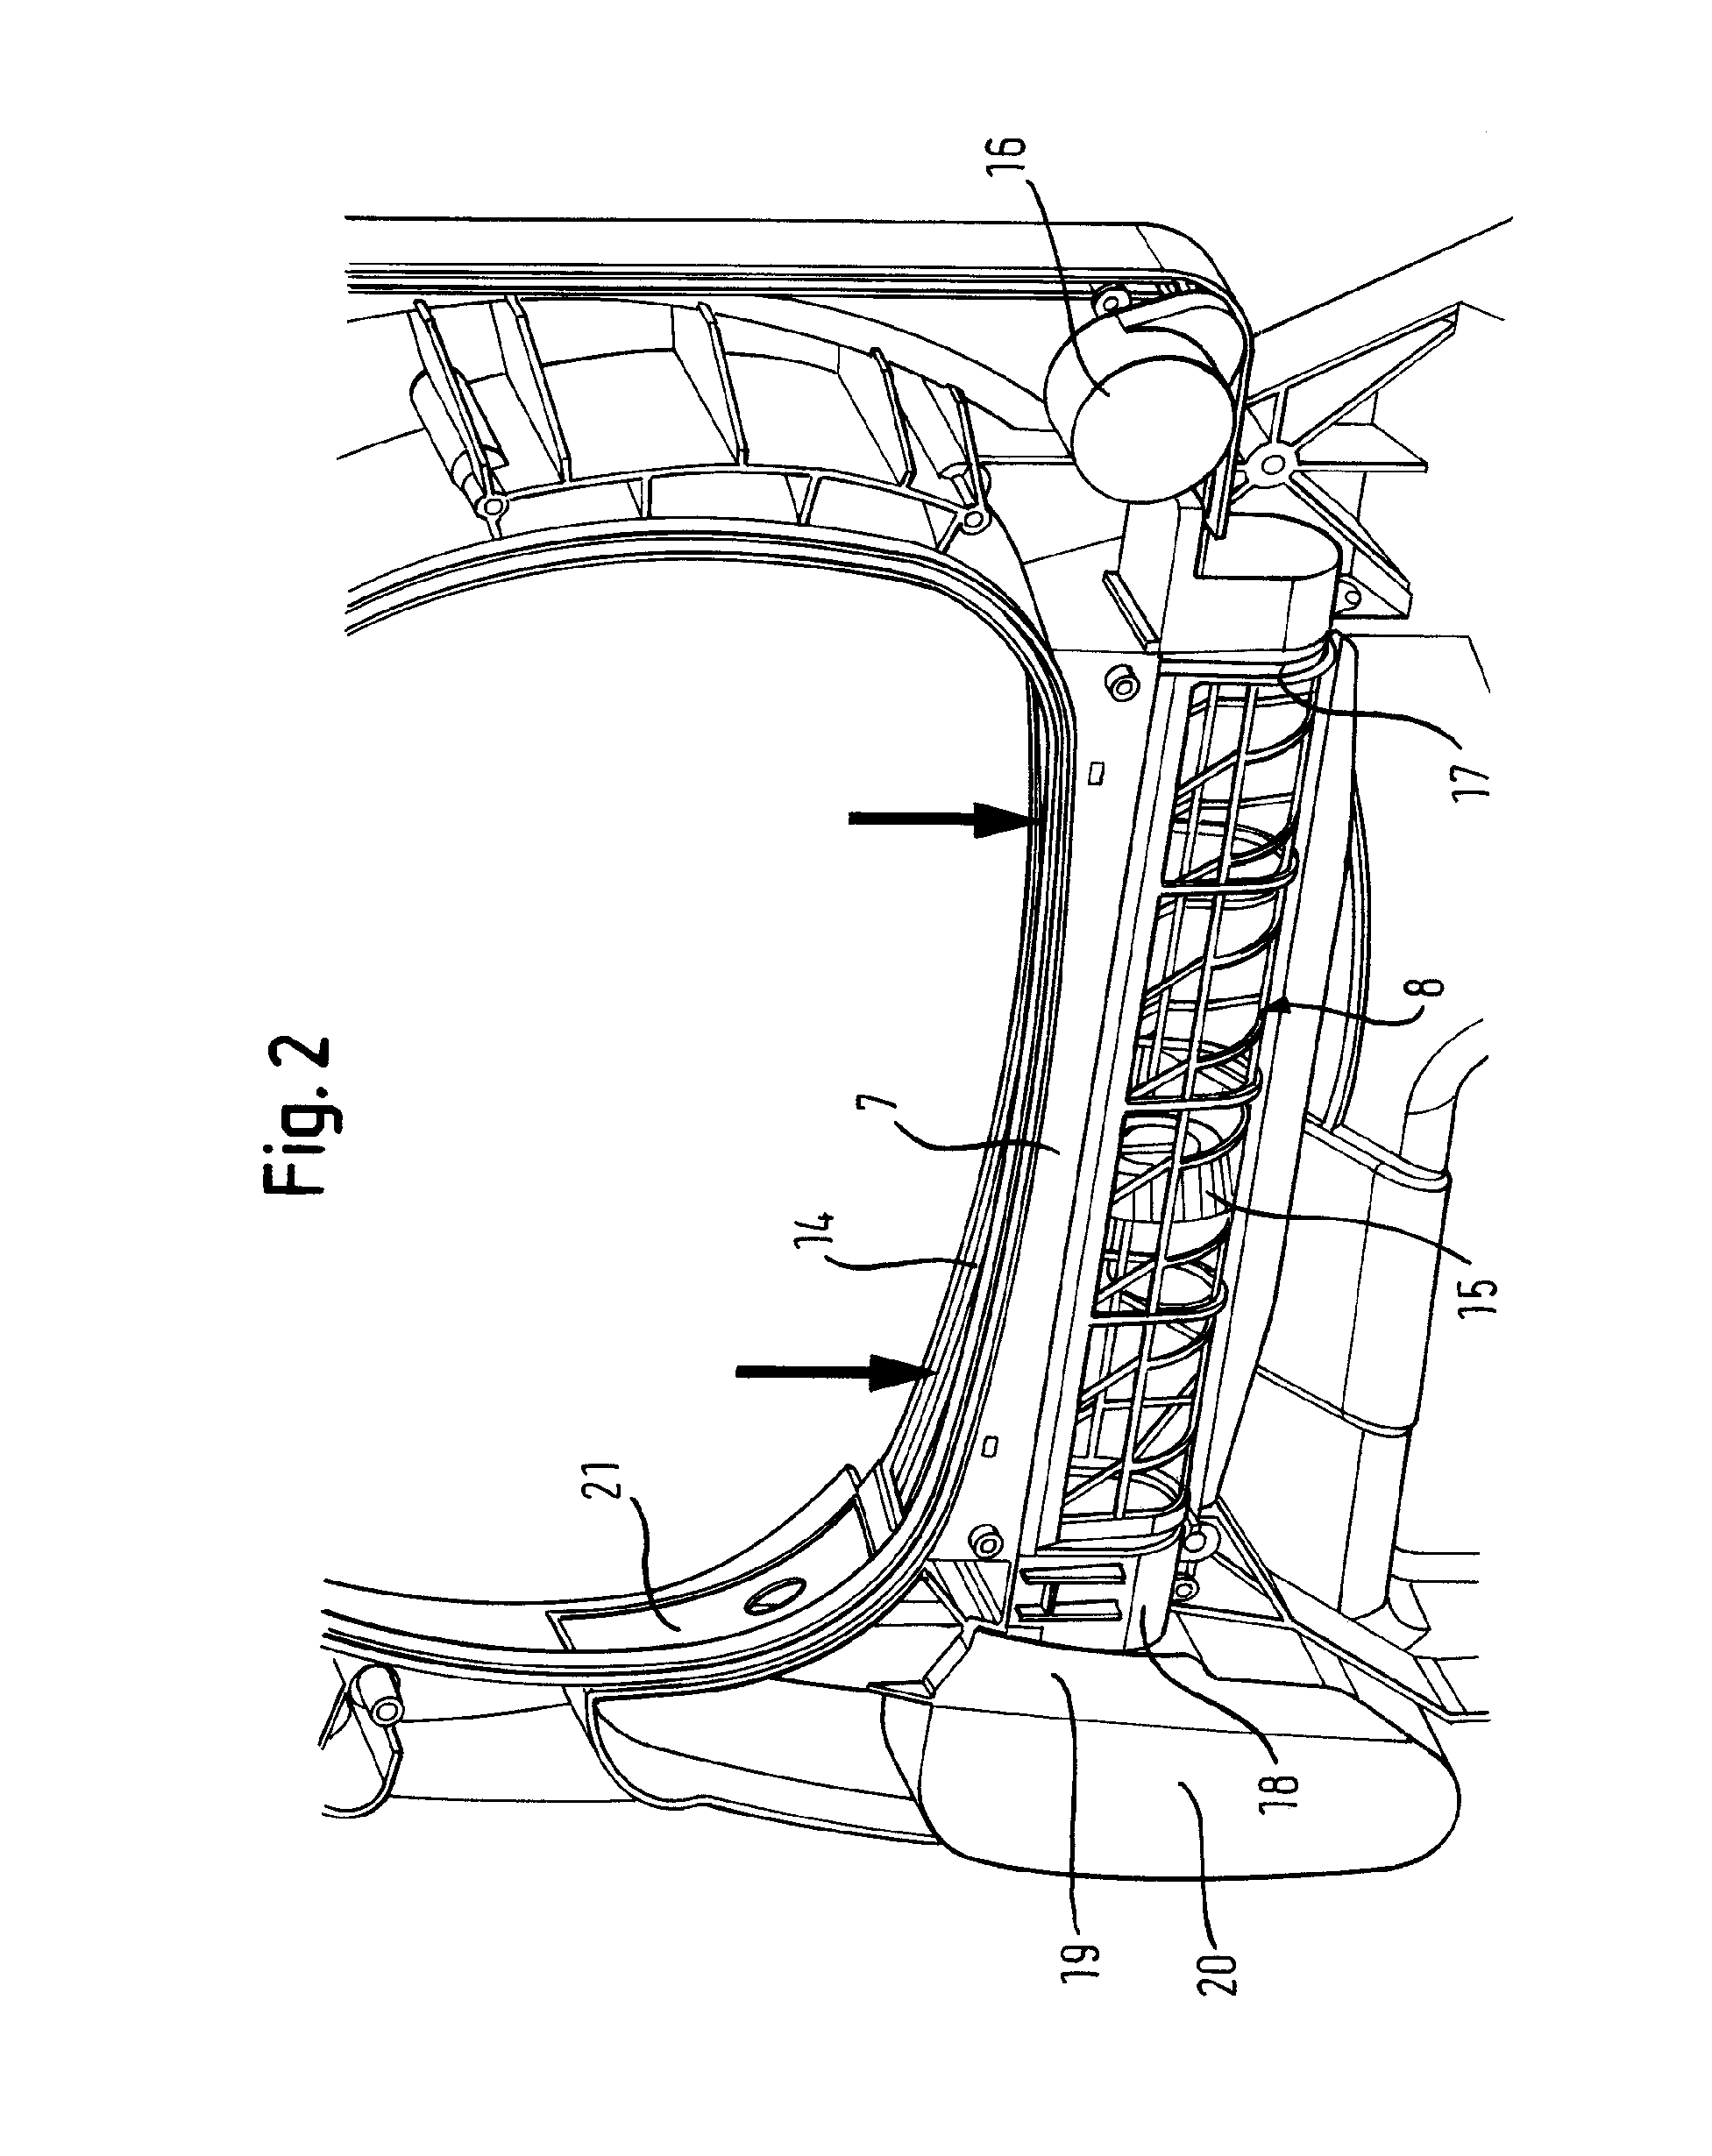 Device for drying laundry by means of a current of air